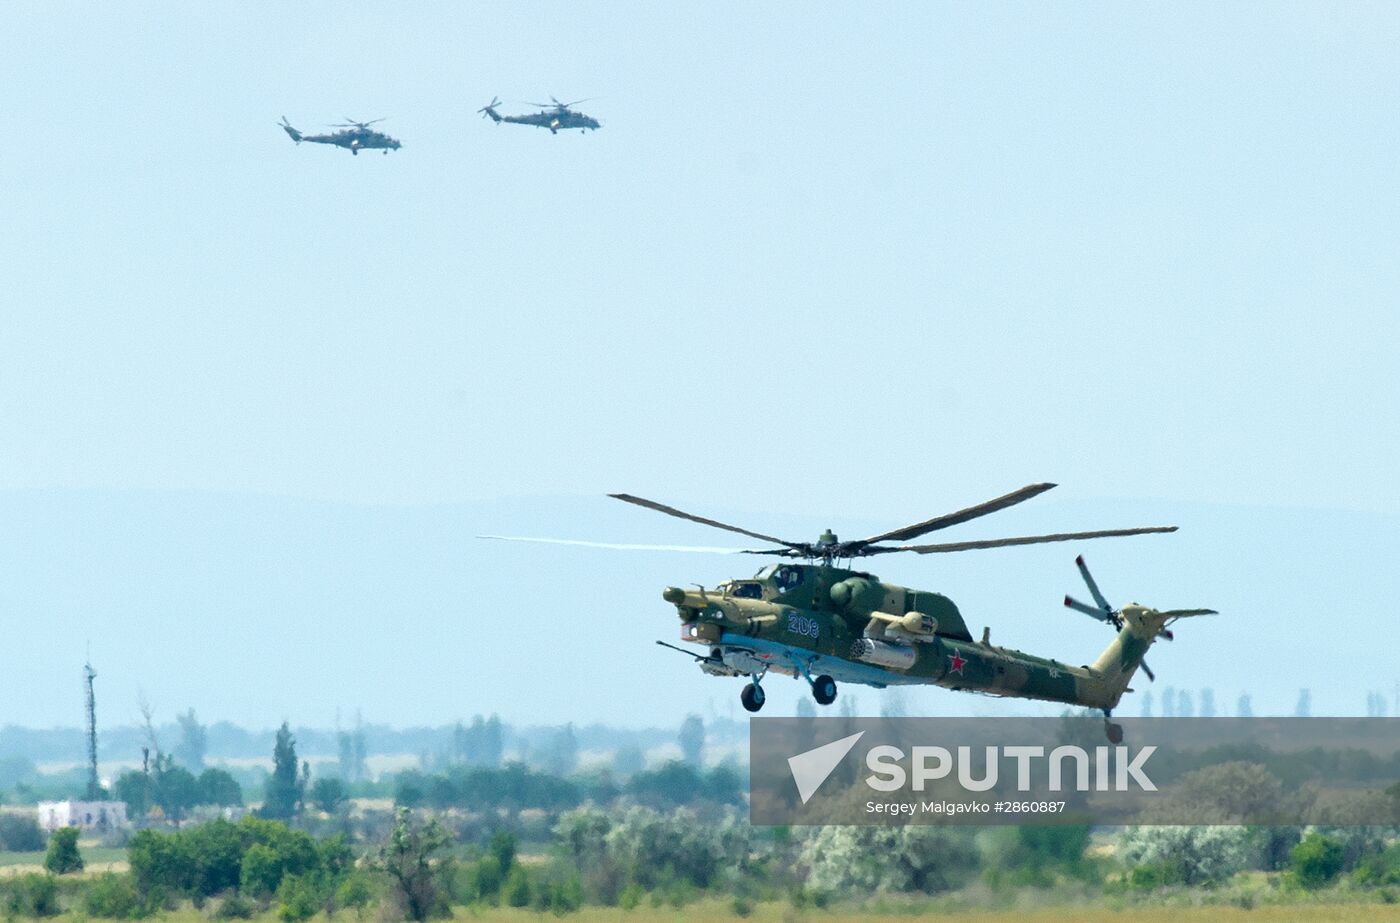 Preparations for Aviadarts-2016 National Competitions of Military Pilots in Crimea